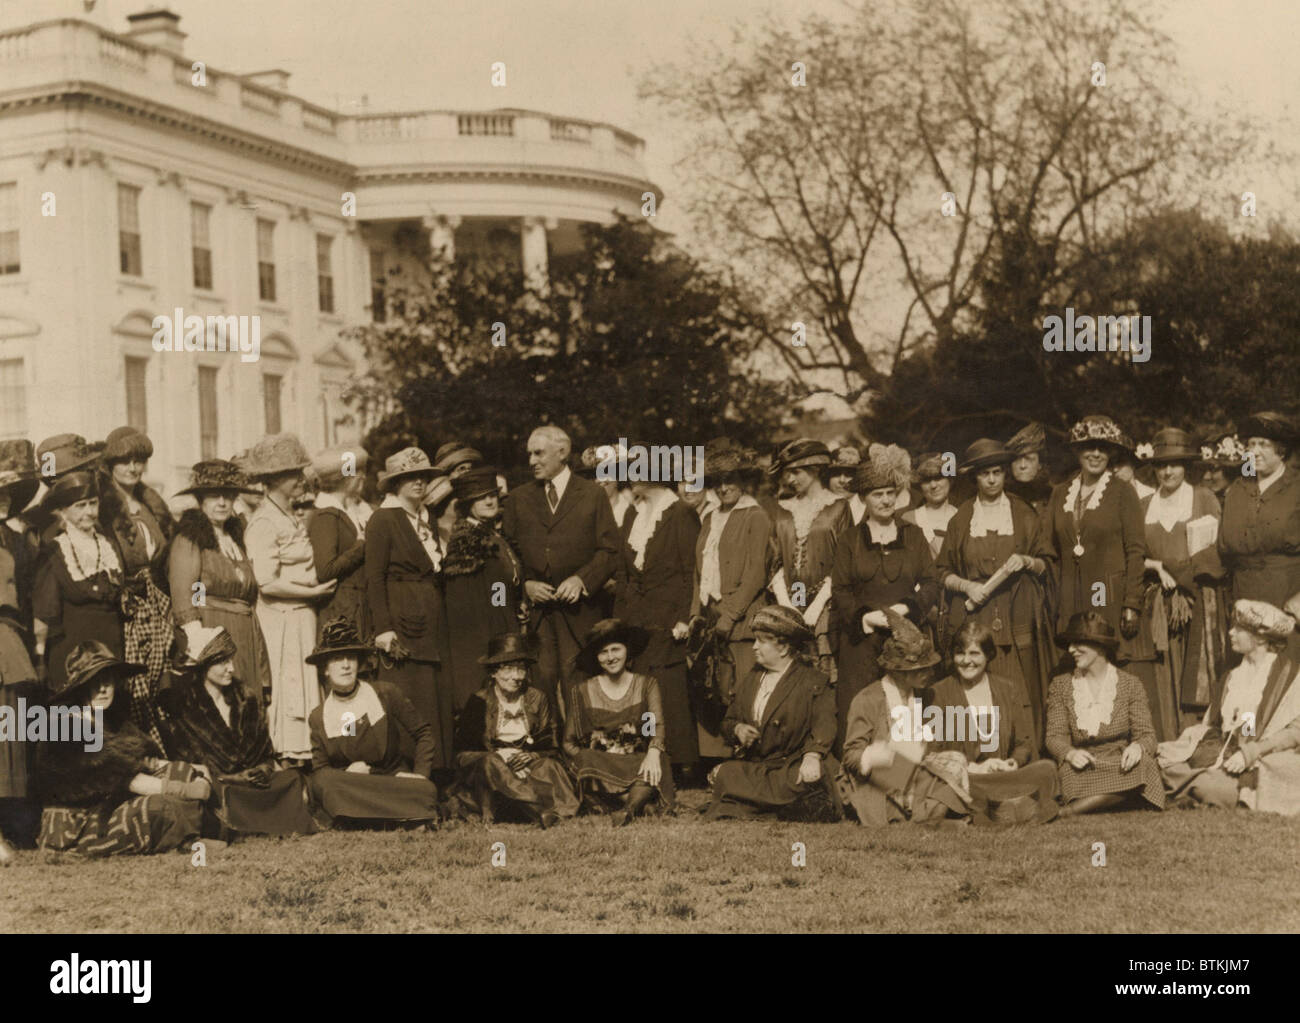 National Woman's Party members with President Harding on the lawn in front of the White House. The women ask the president's aid in passing an 'Equal Rights Bill' in the next Congress. The bill they proposed would give married women citizenship and equal rights of inheritance and contract. Stock Photo